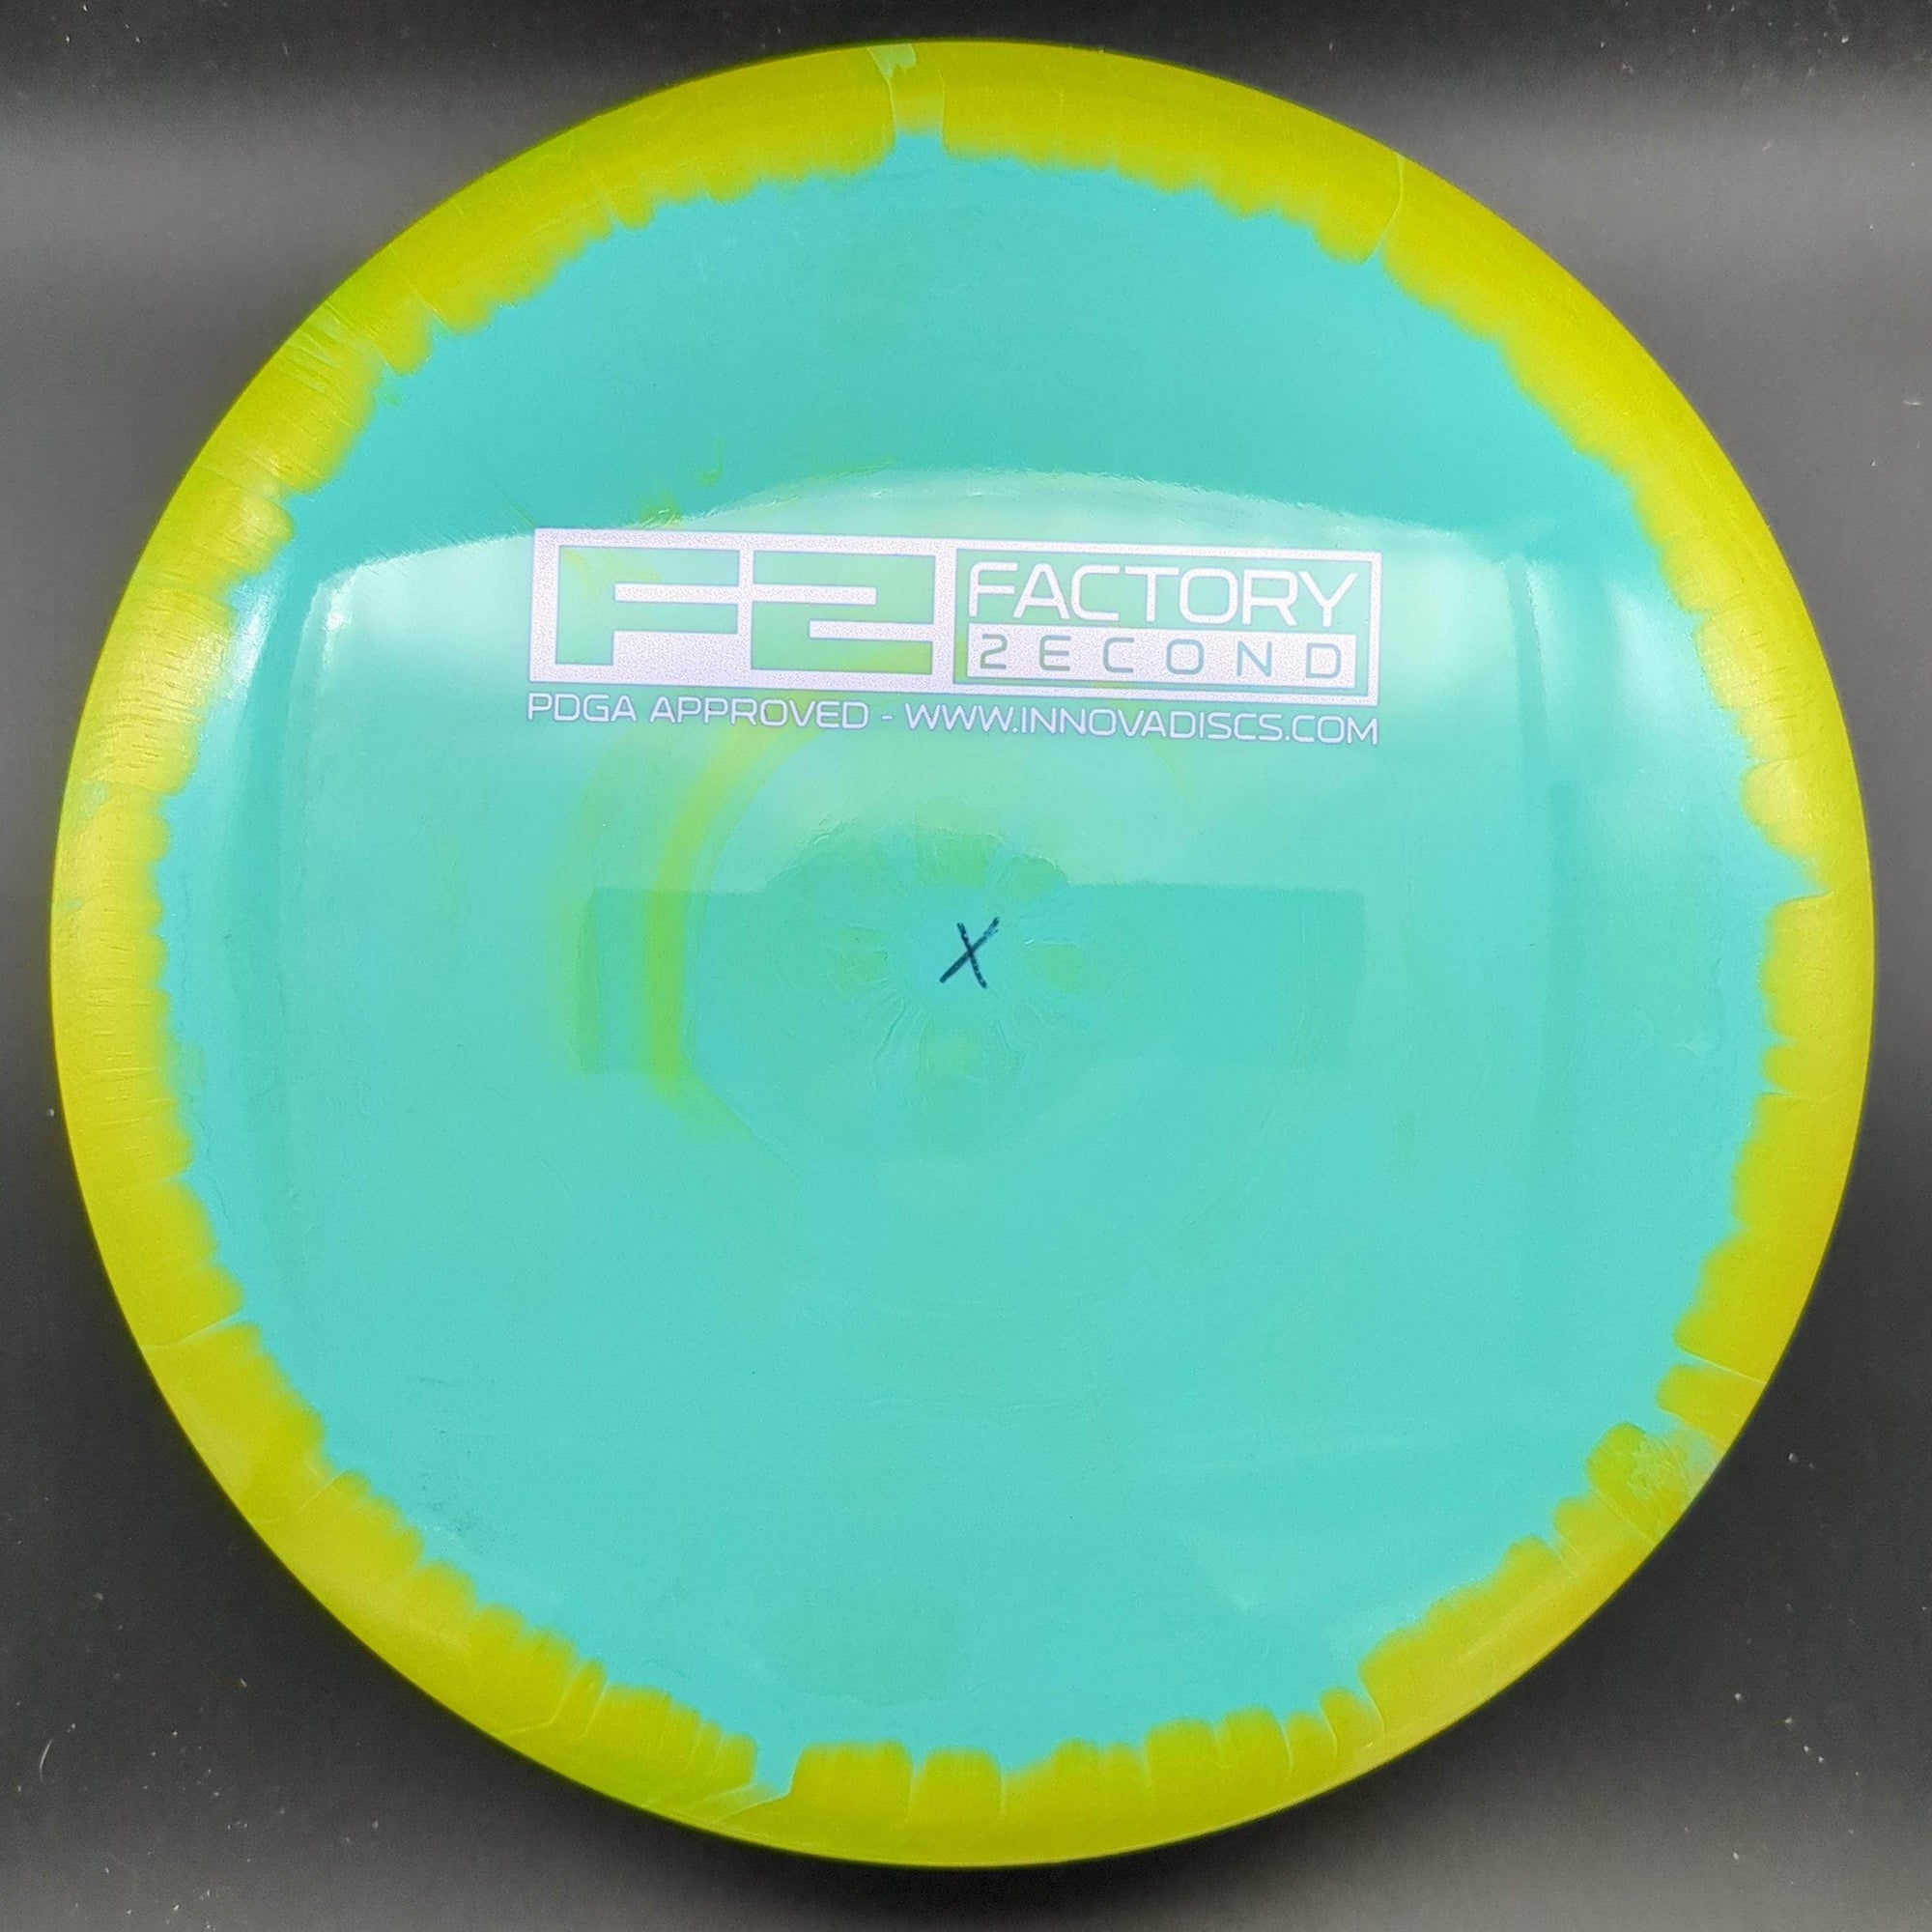 Innova Fairway Driver Yellow Rim Teal Plate 175g Orc, Halo, Factory Second